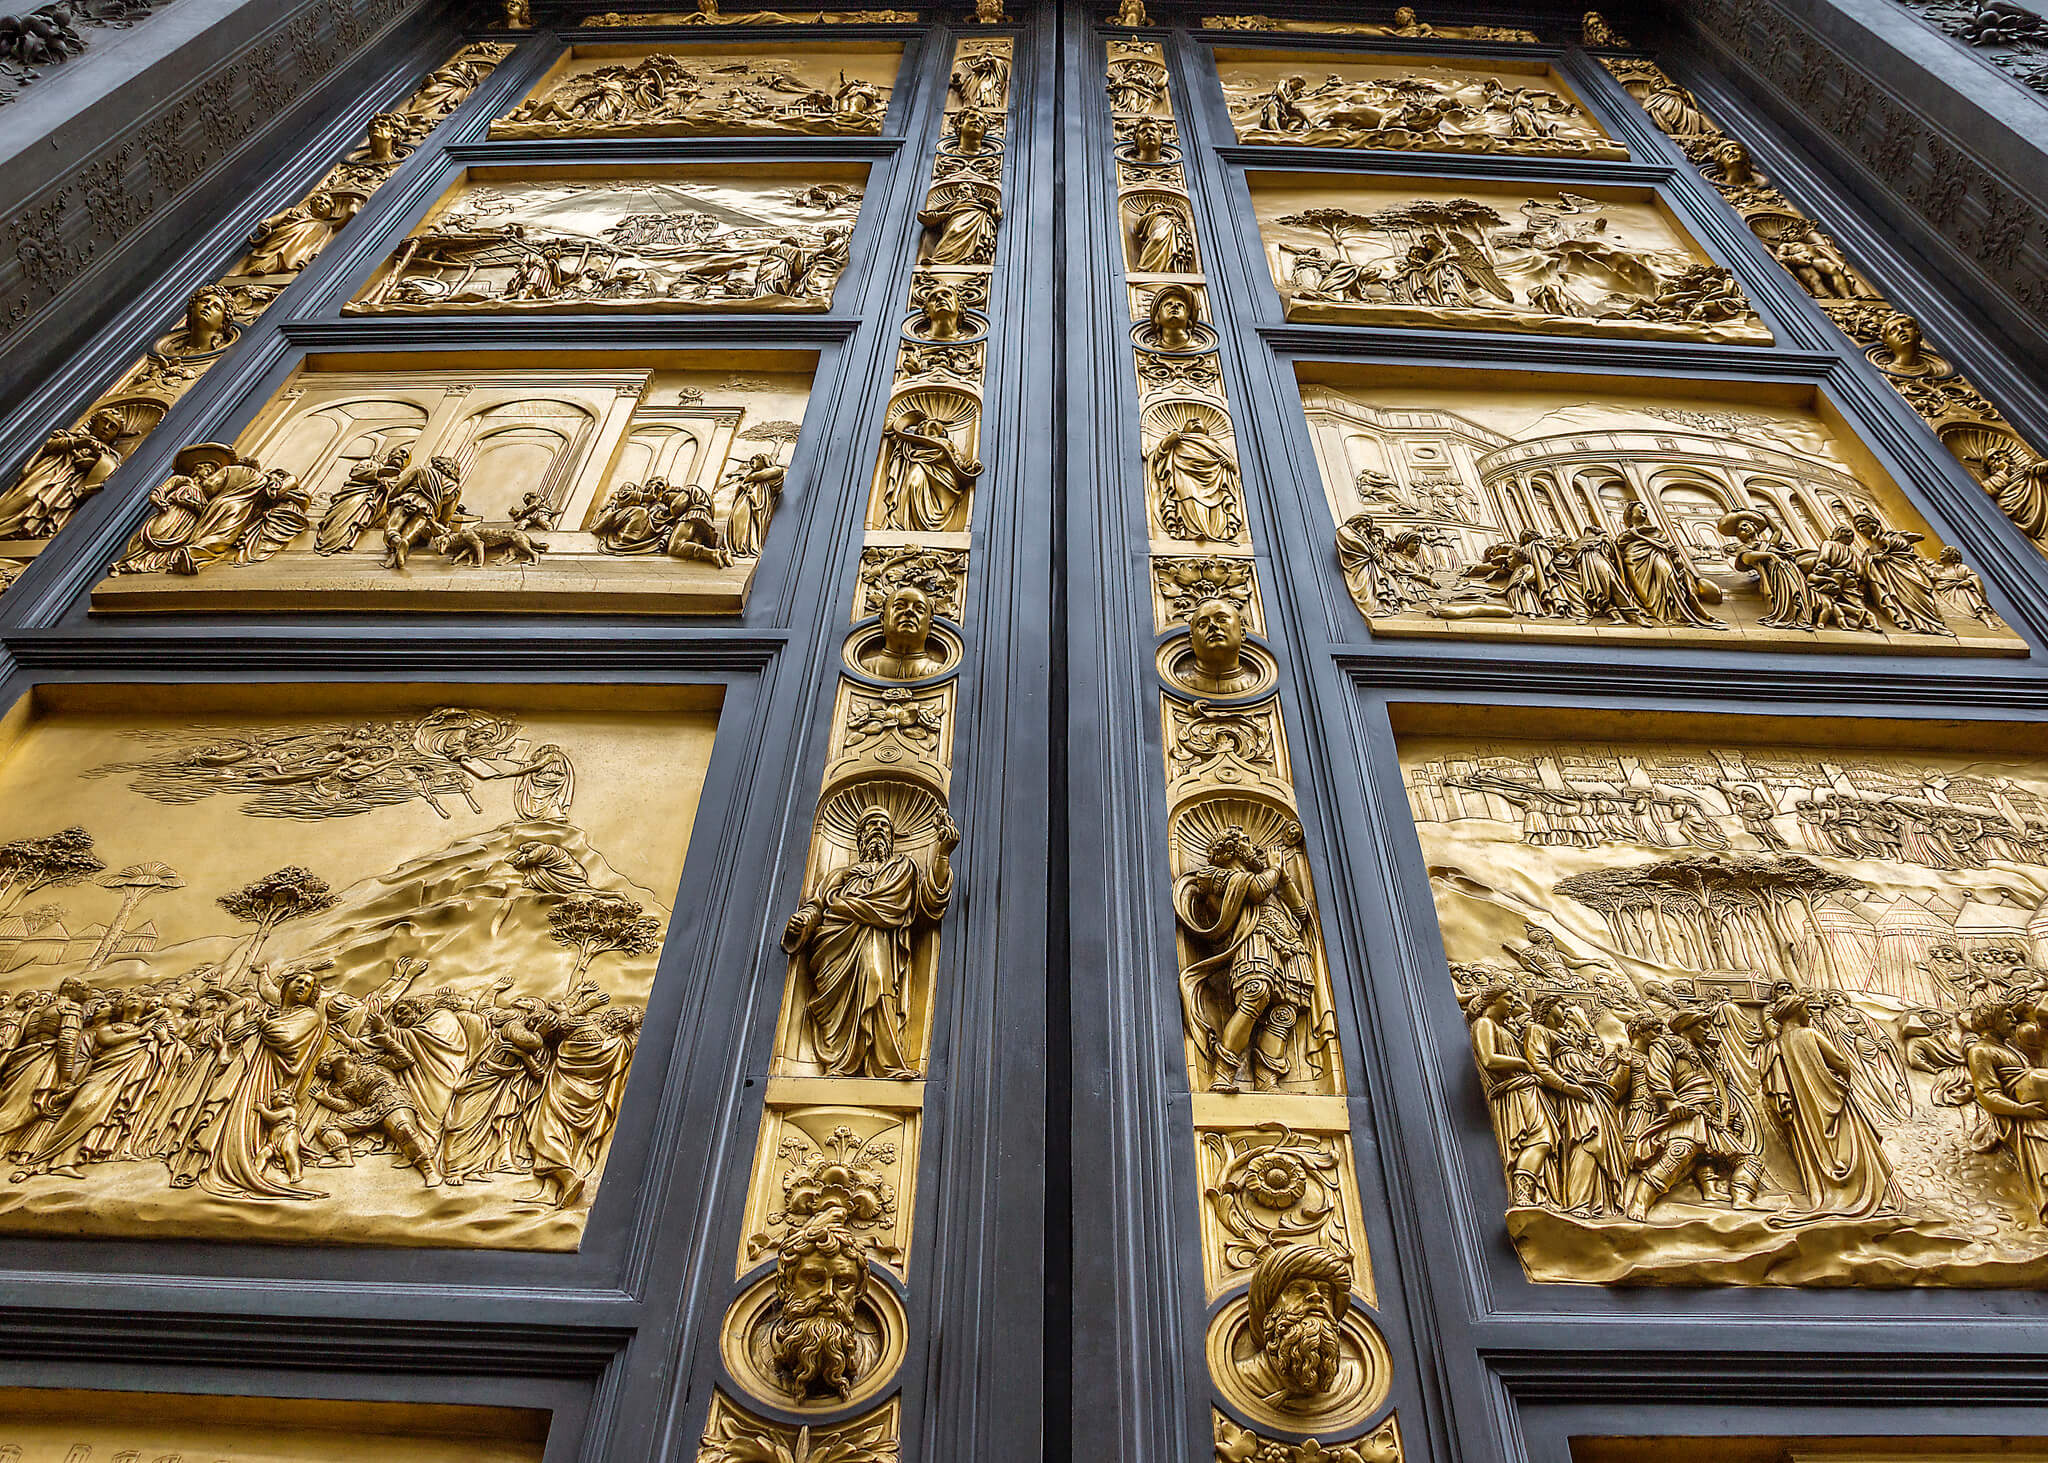 Bronze, gilt-coated doors of the Baptistery of San Giovanni